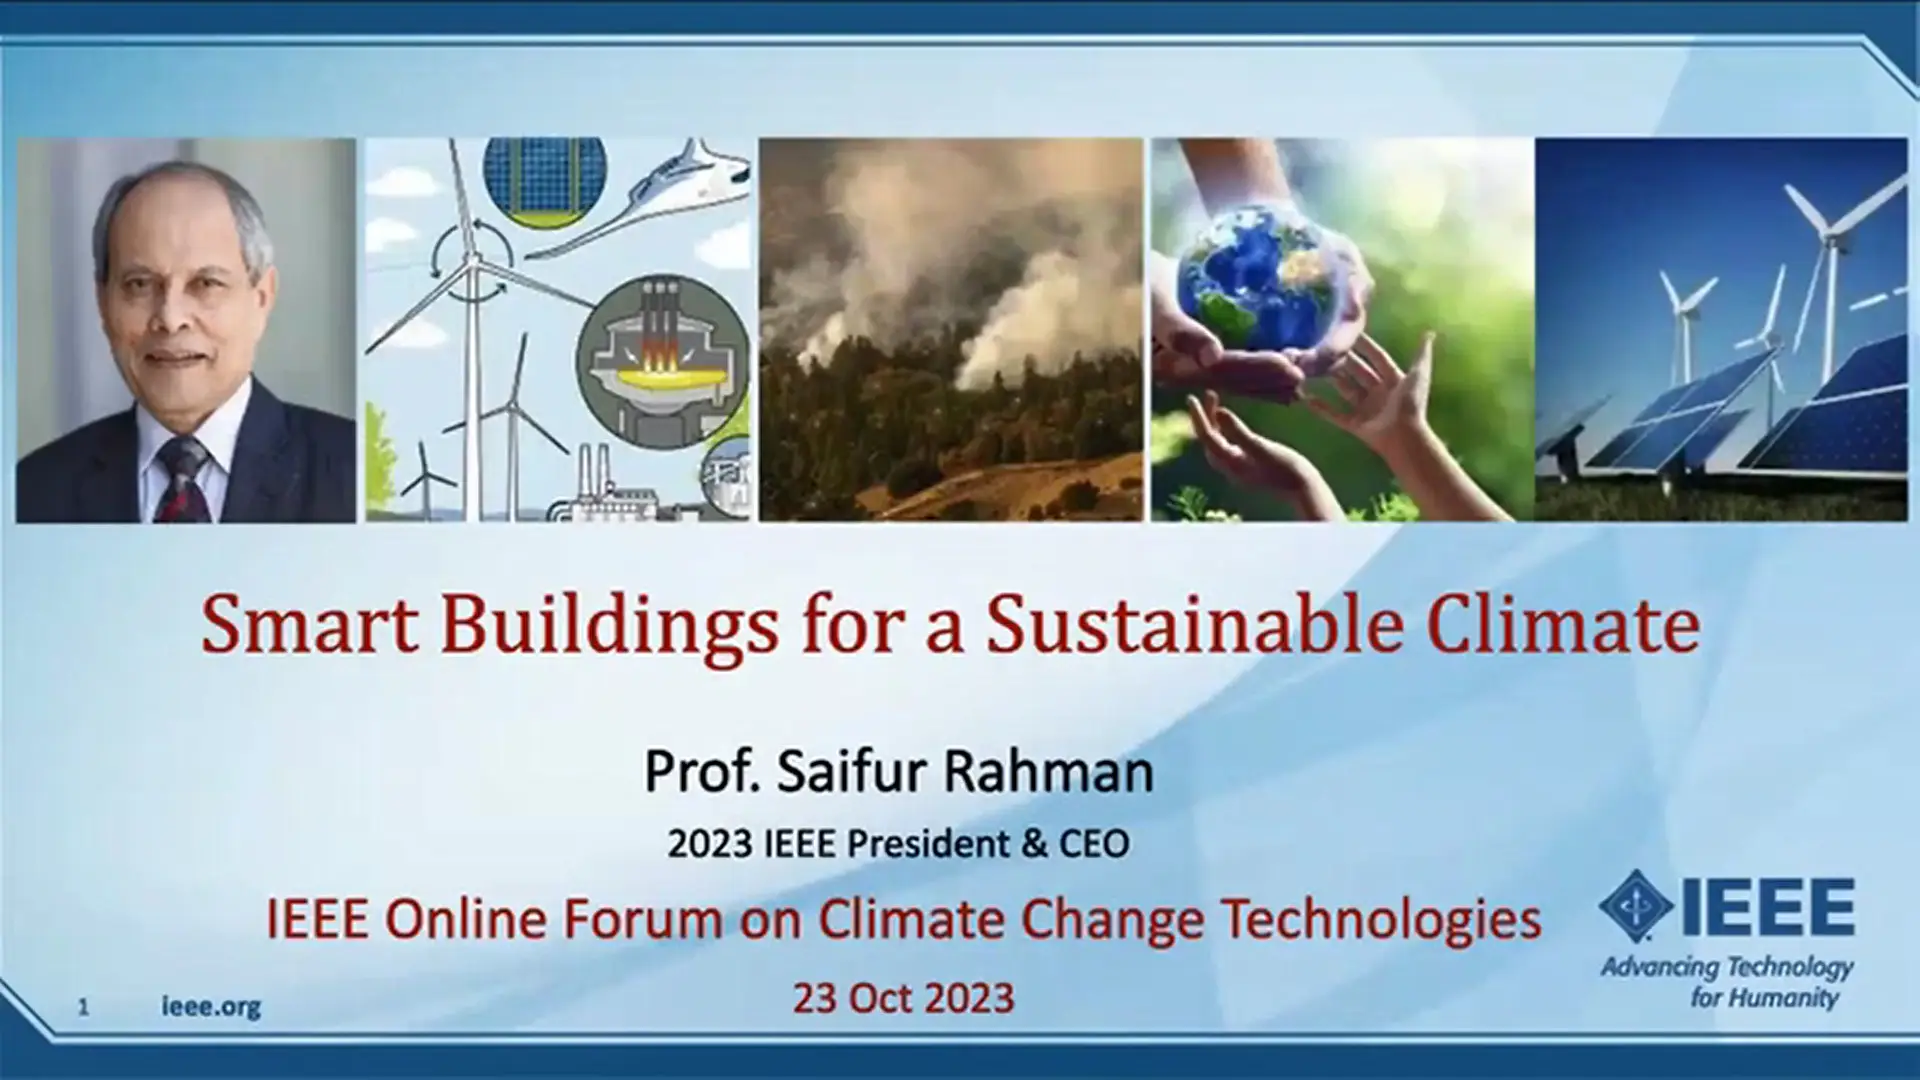 IEEE OFCCT 2023: Keynote 1.1: Sensing and Automation Technologies in Smart Buildings for a Sustainable Climate